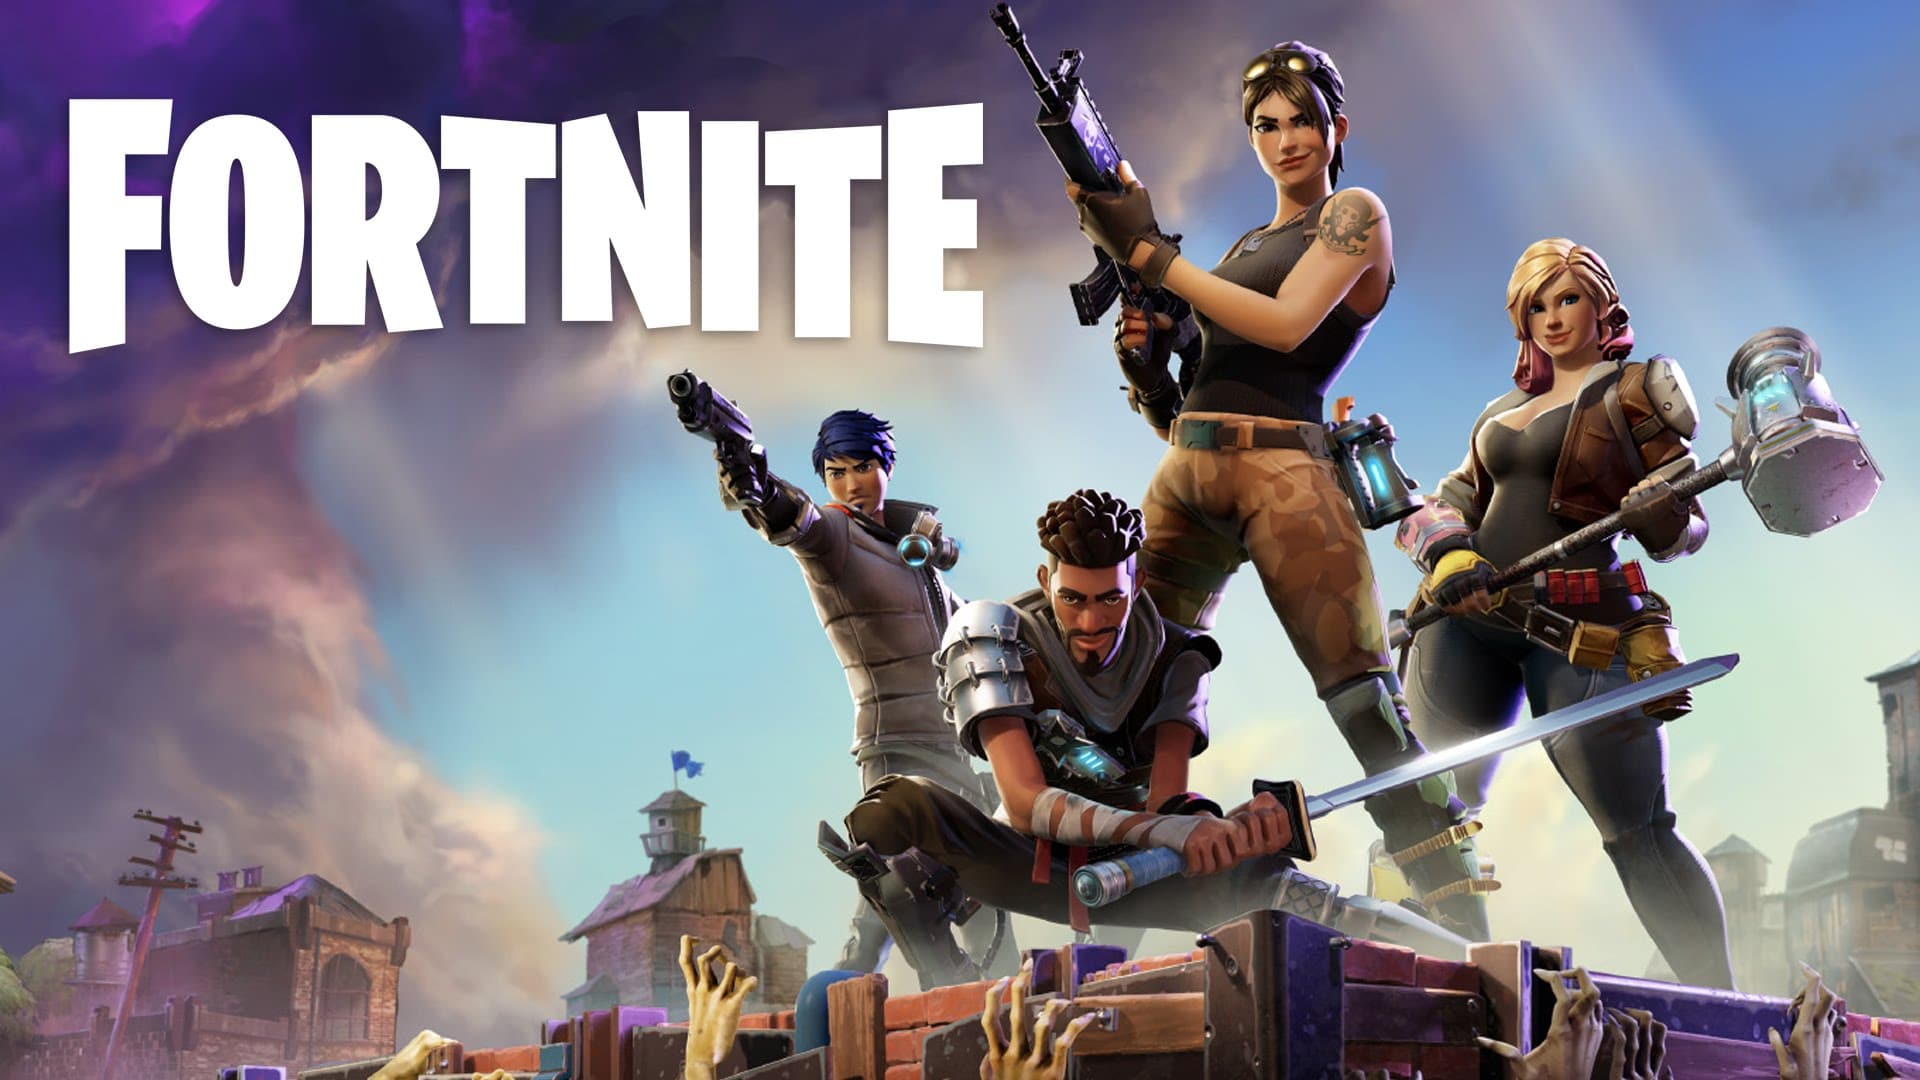 Lessons from Fortnite for Project Management